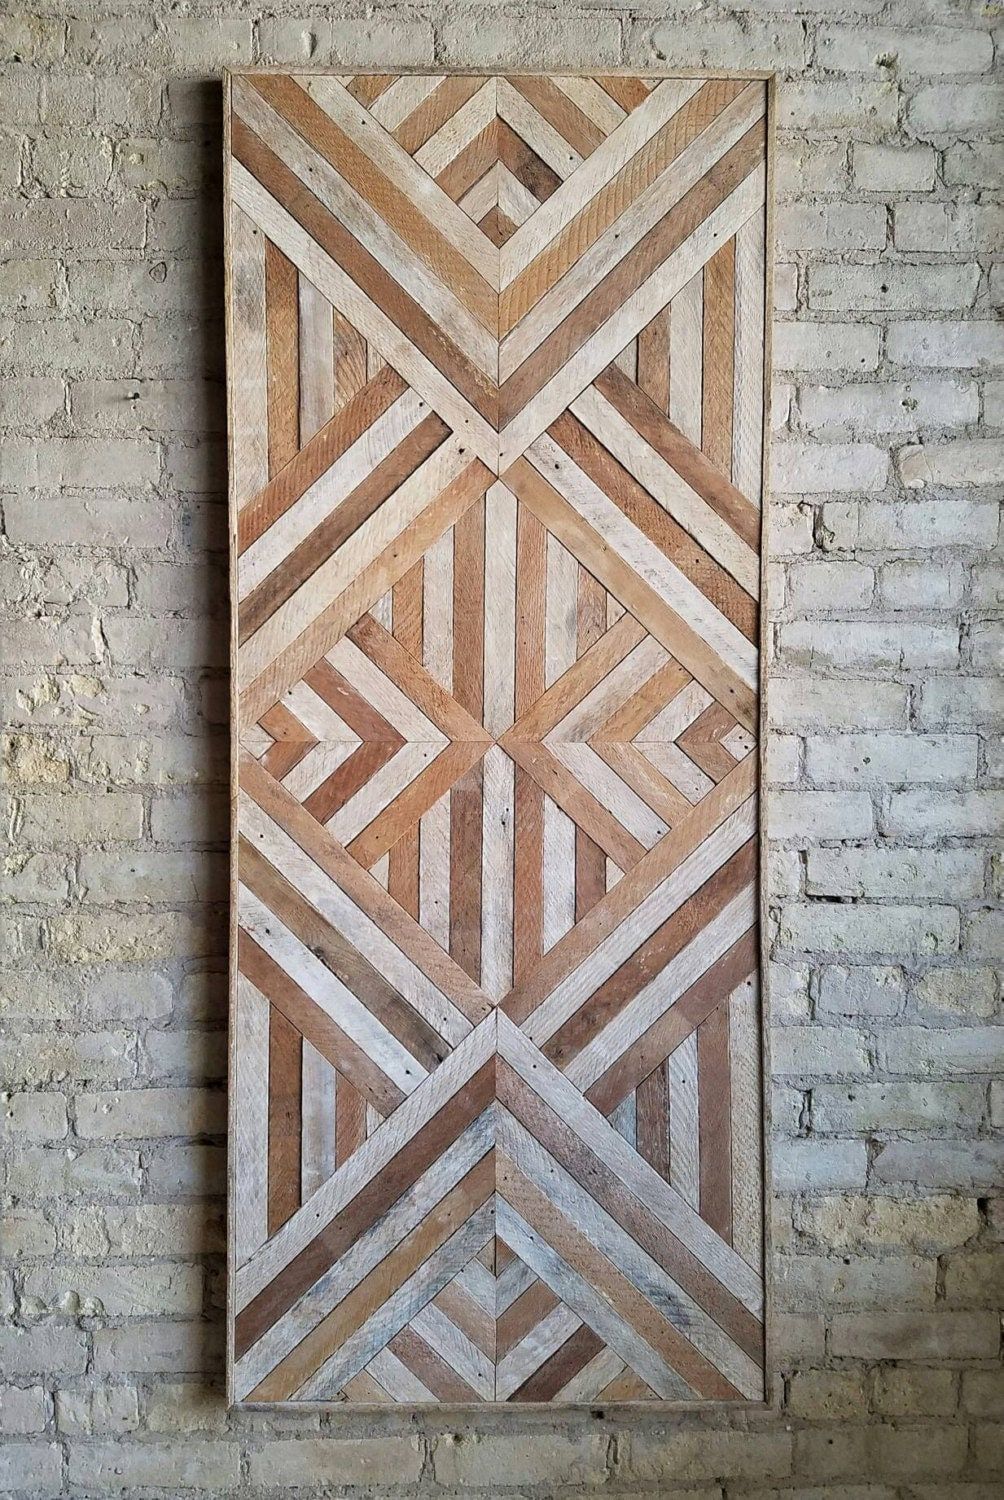 Reclaimed Wood Wall Art, Queen Headboard, Wood Wall Decor Intended For 2018 Geometric Wood Wall Art (View 19 of 20)